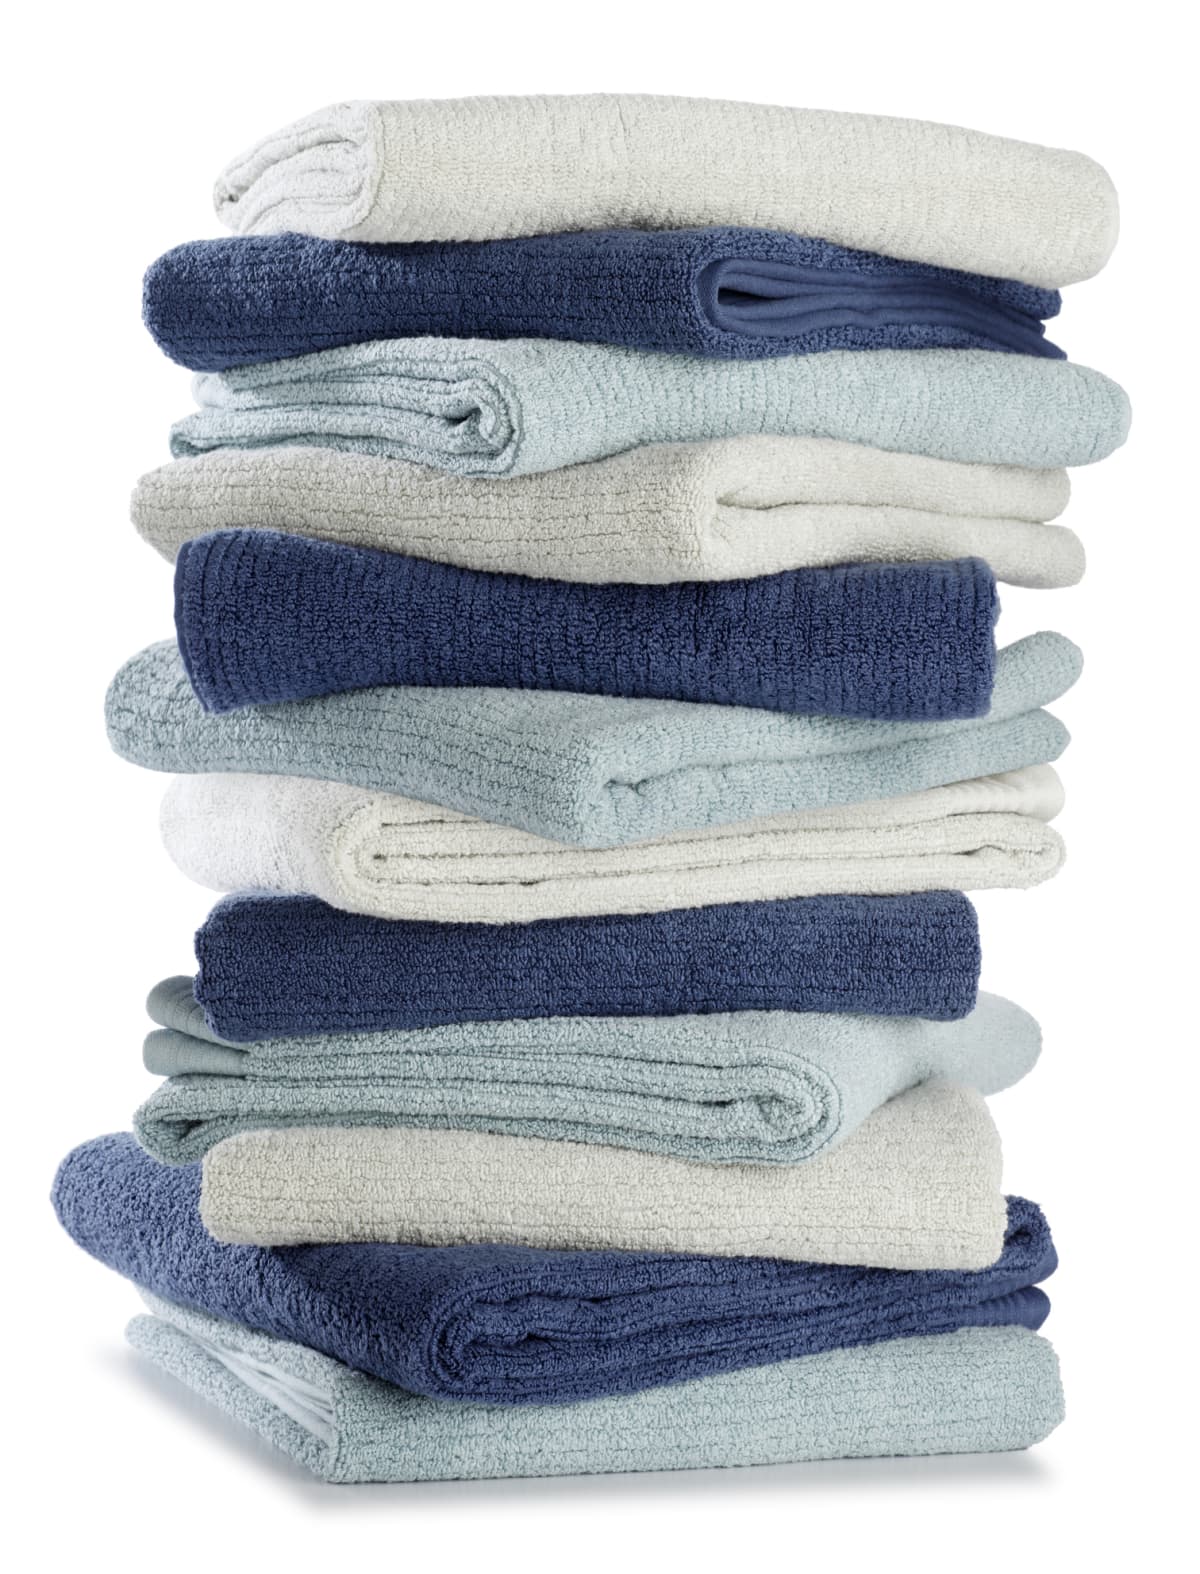 Folded stack of towels